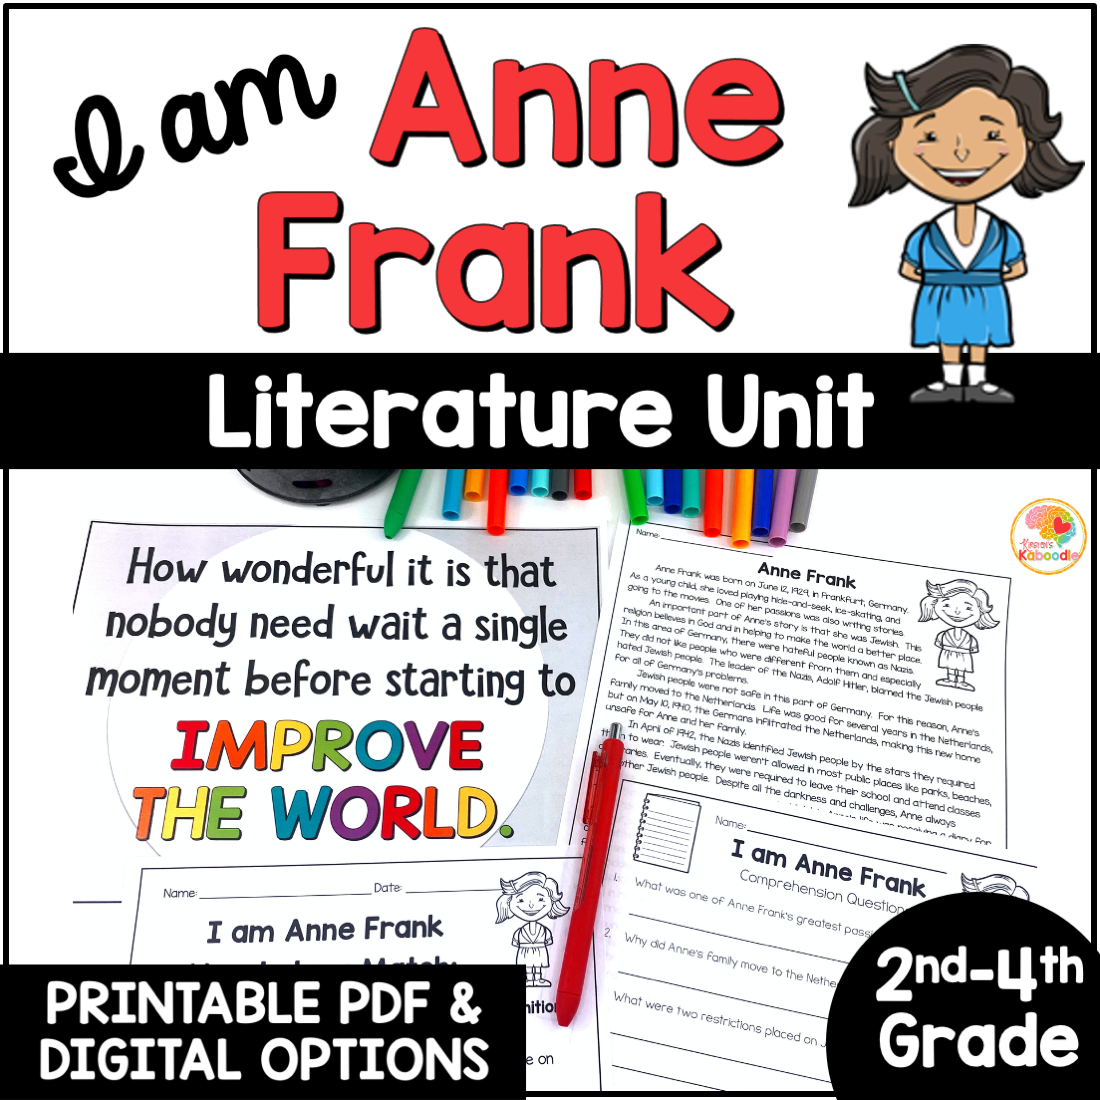 i-am-anne-frank-by-meltzer-activities